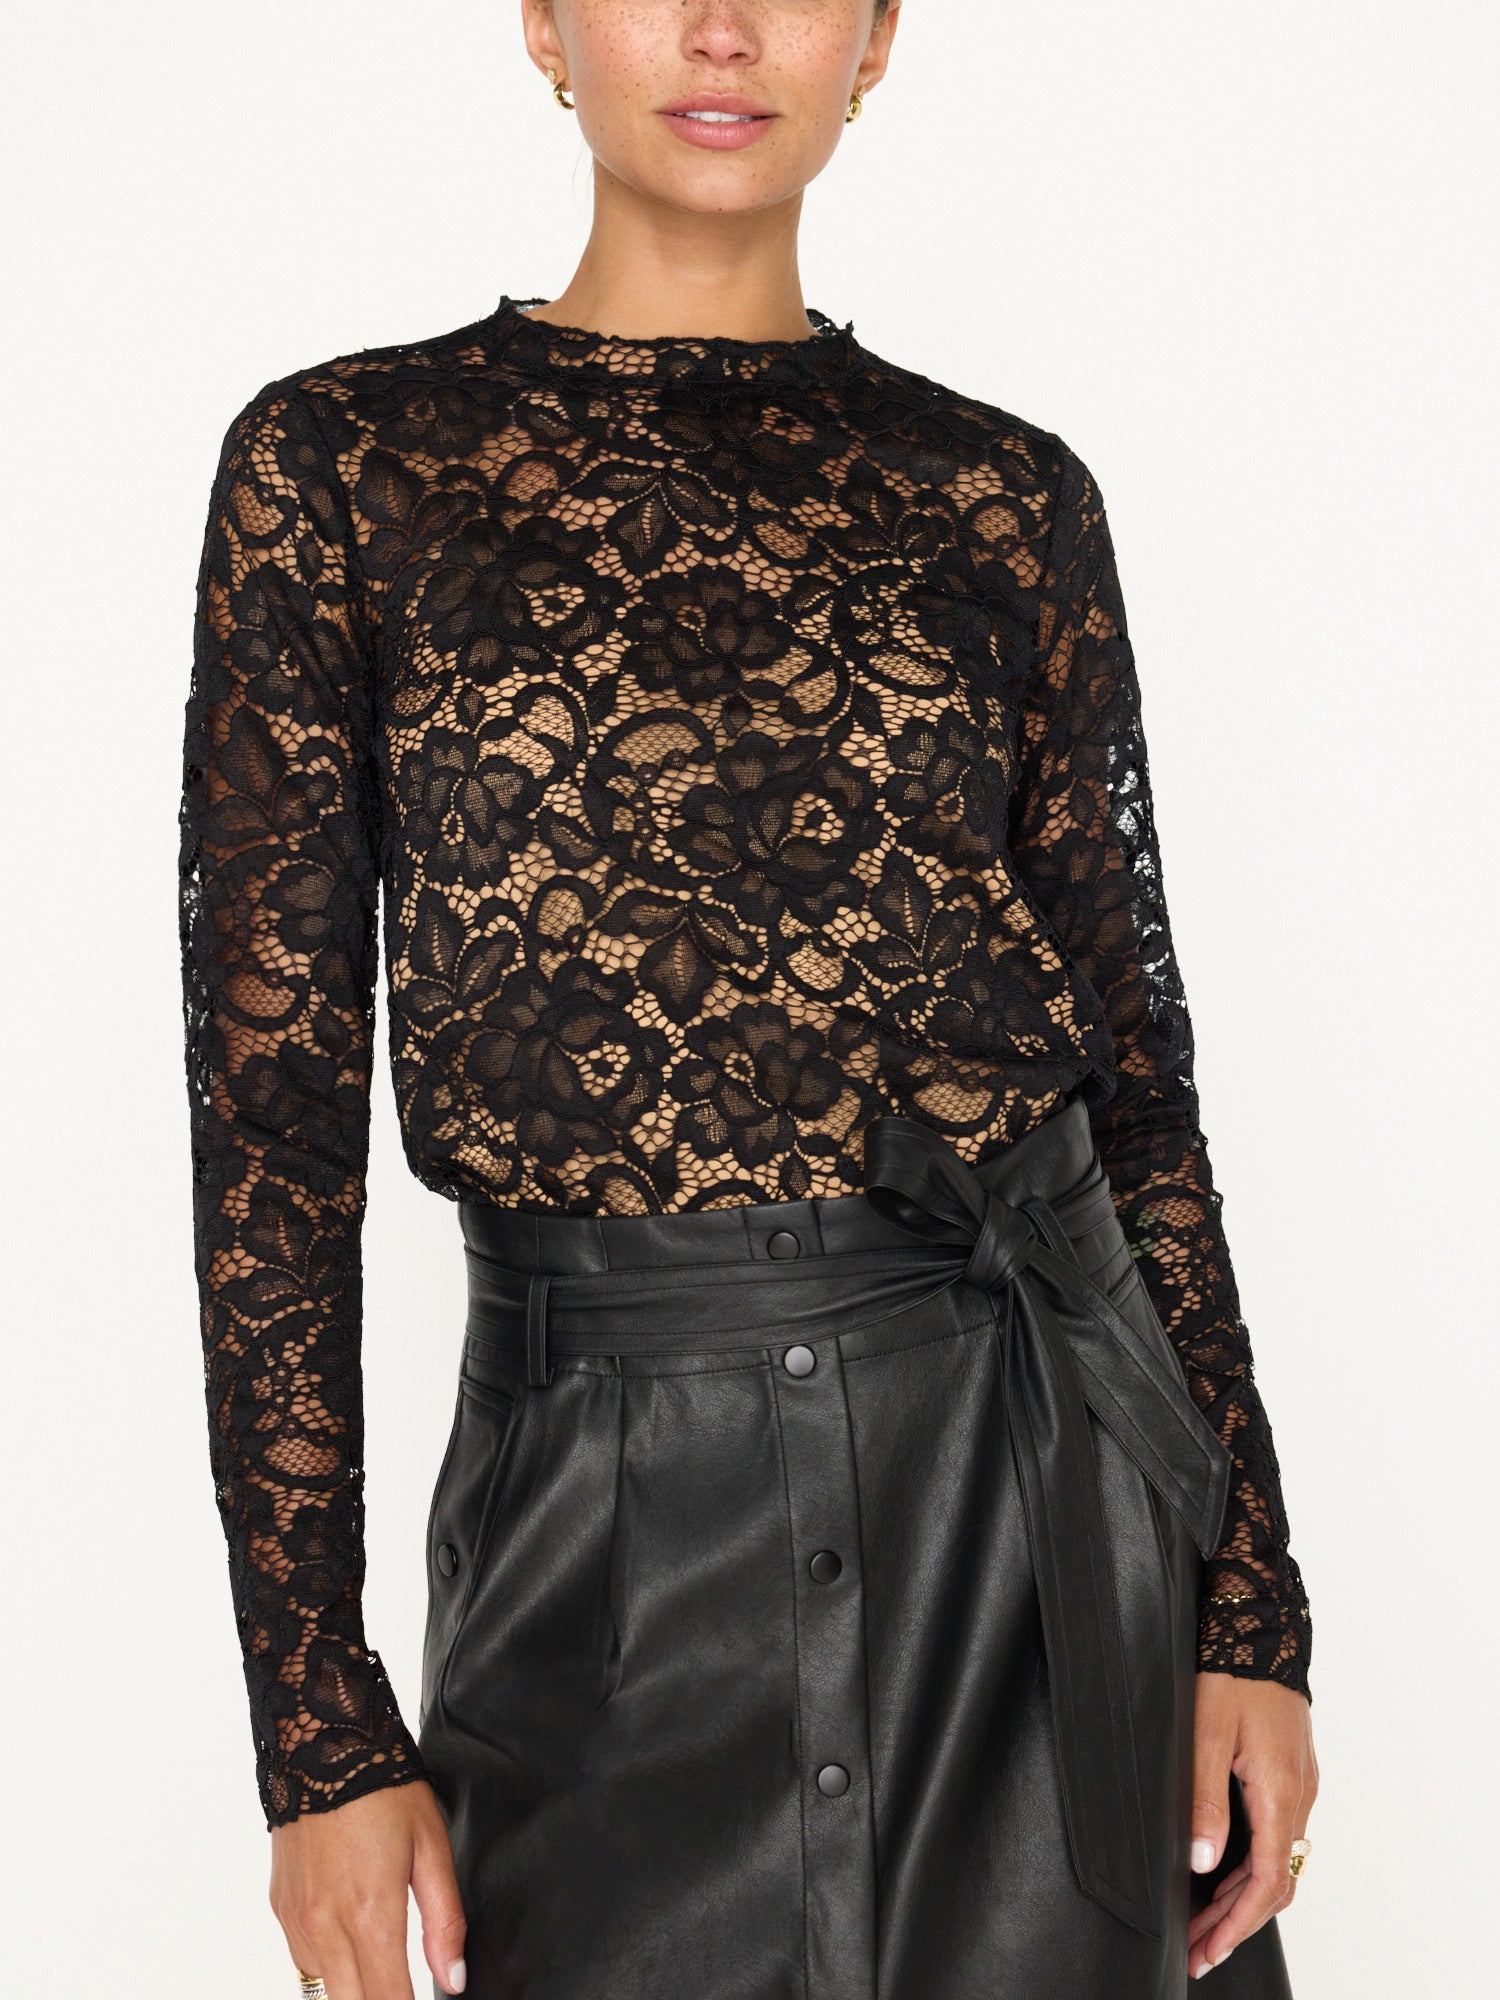 Donne black lace long sleeve top front view 2